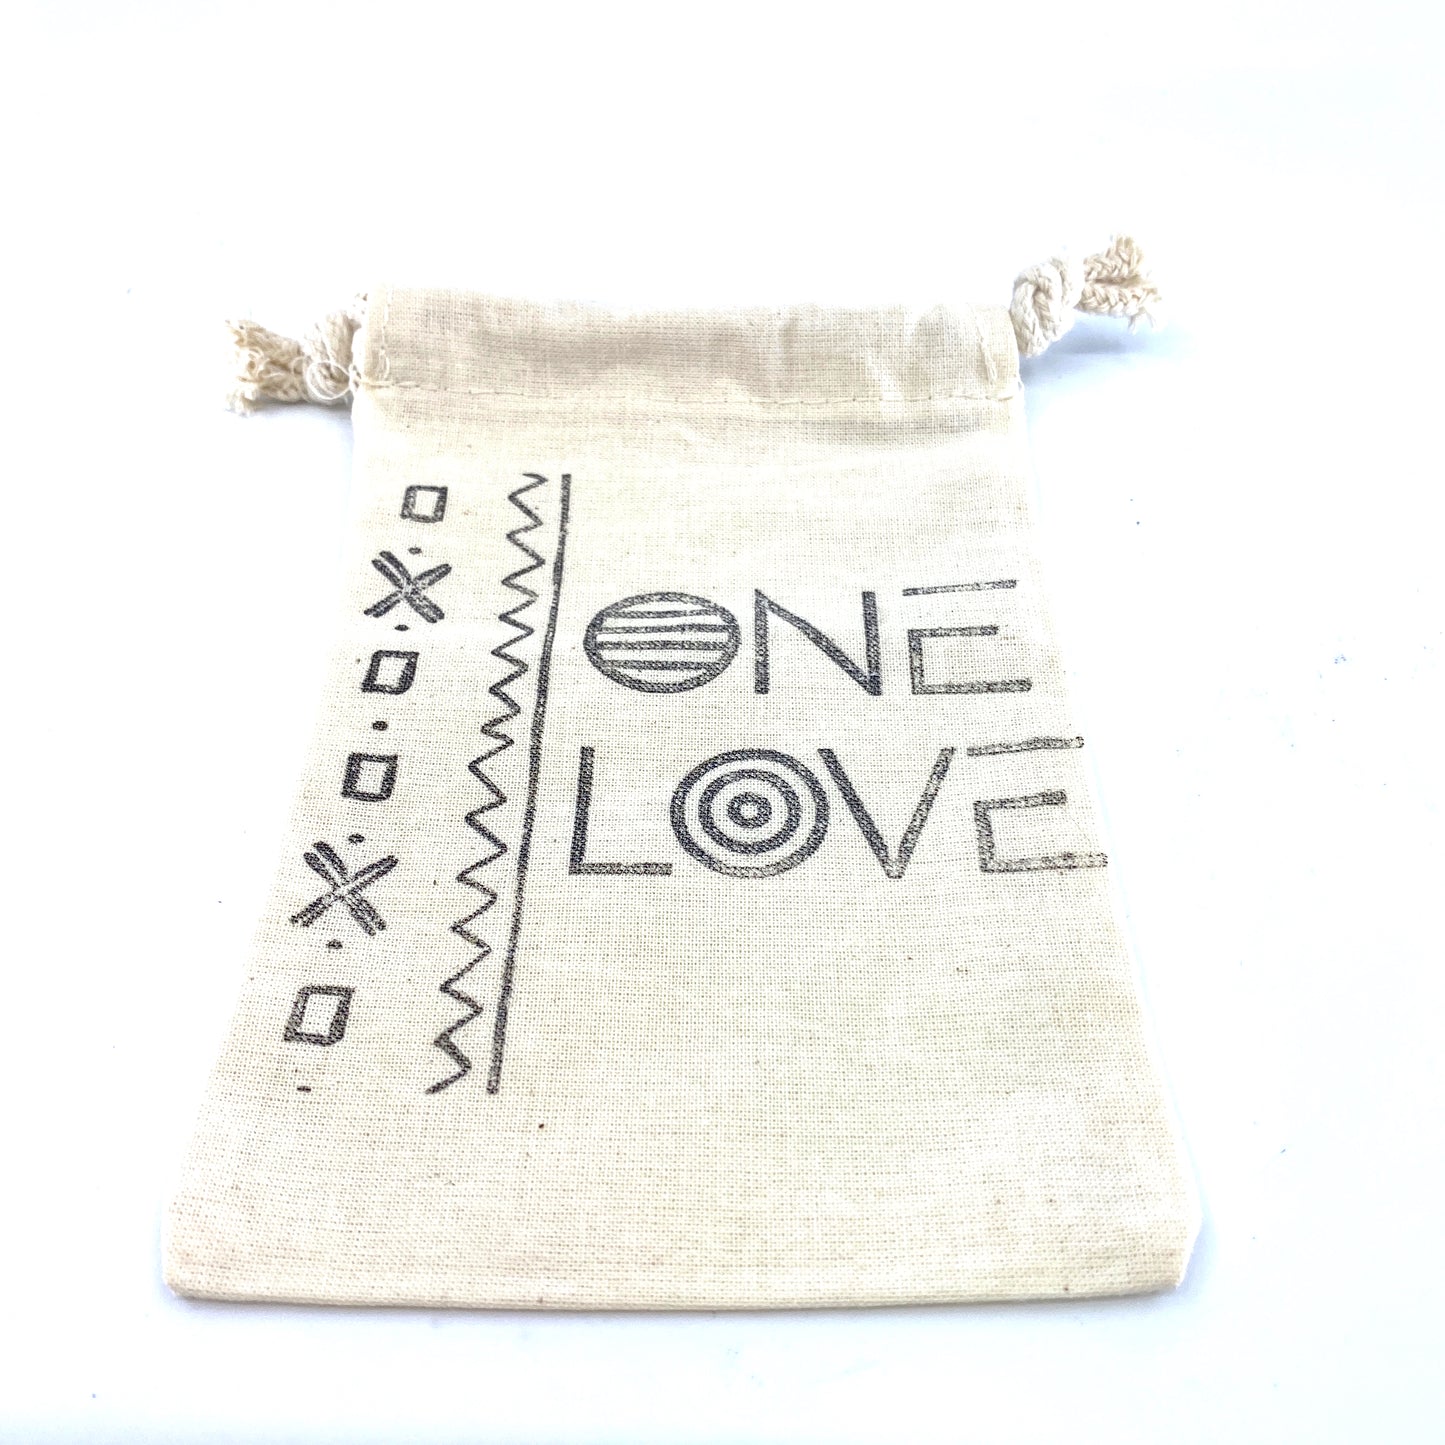 Hand Stamped, One Love, Cotton Drawstring Pouches 4" x 6" Sunsum®